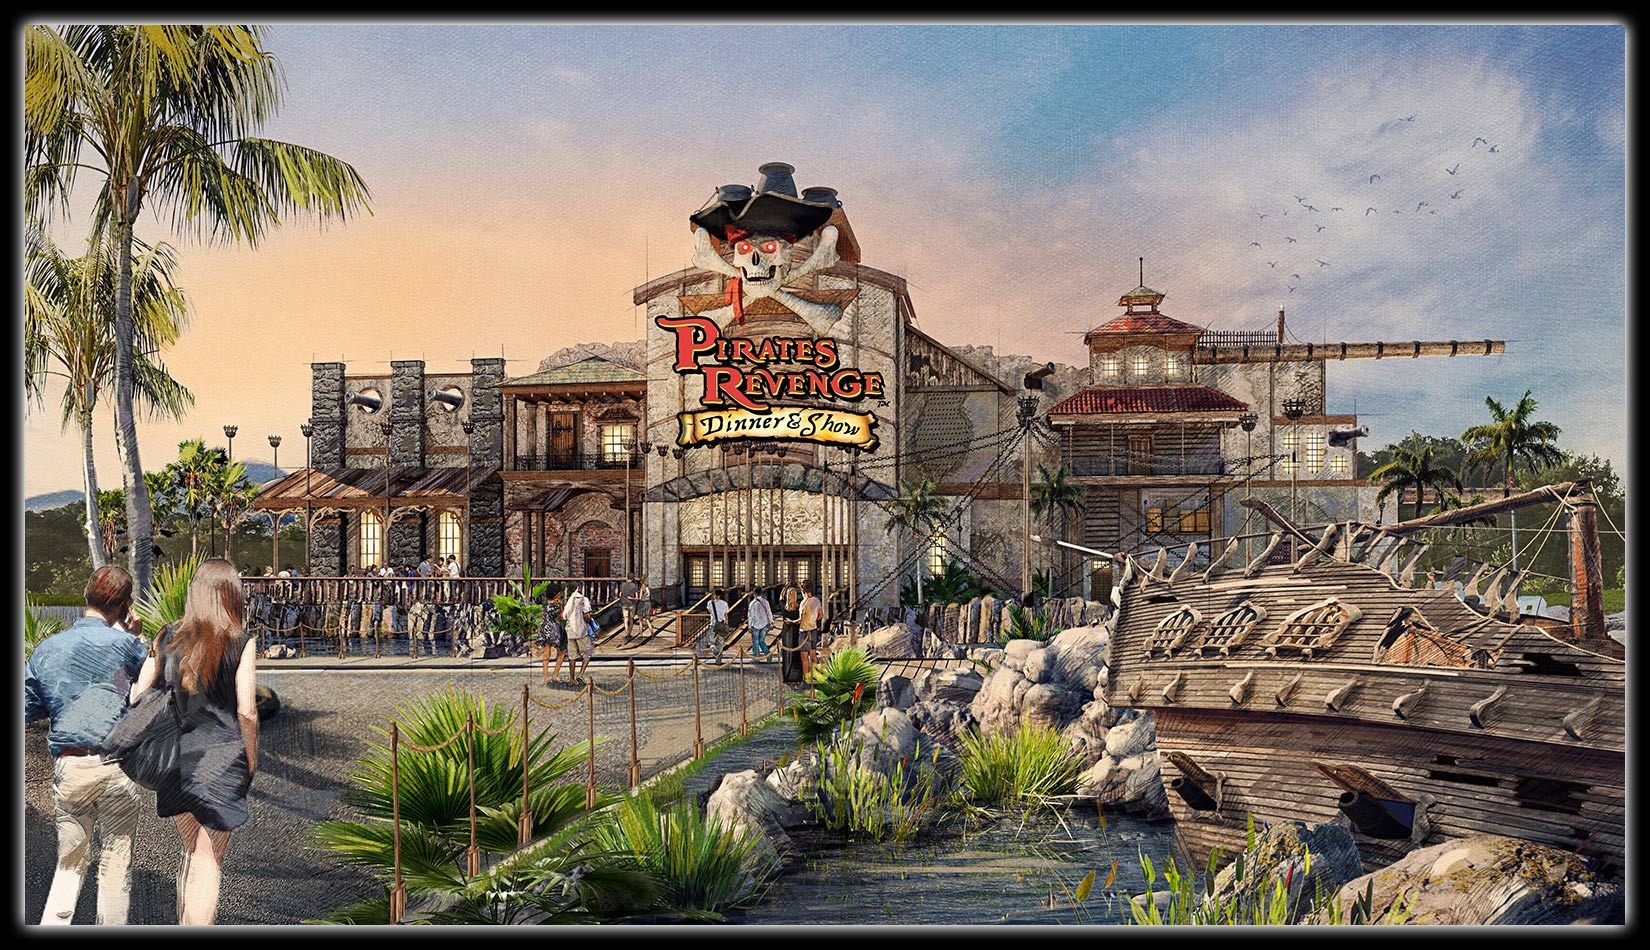 Pirates Revenge Dinner and Show Coming to Pigeon Forge